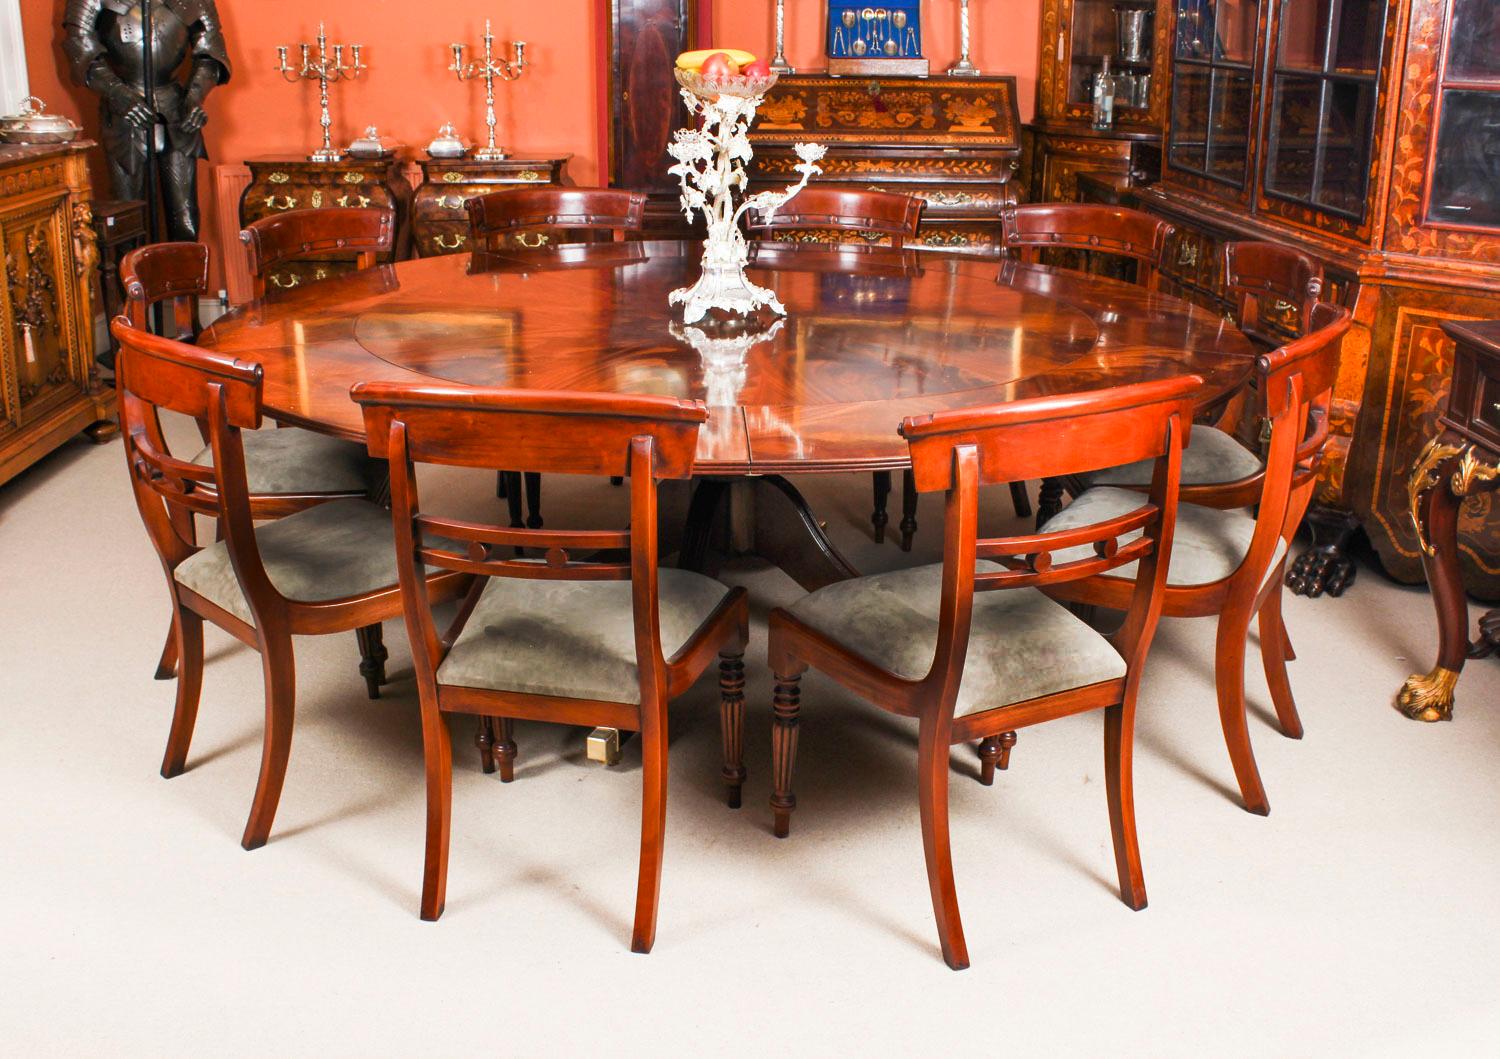 This beautiful dining set comprises a Regency Revival Jupe style flame mahogany dining table and a set of ten Regency Revival dining chairs, dating from the mid-20th century.

The table has a solid mahogany top with a fabulous flame mahogany